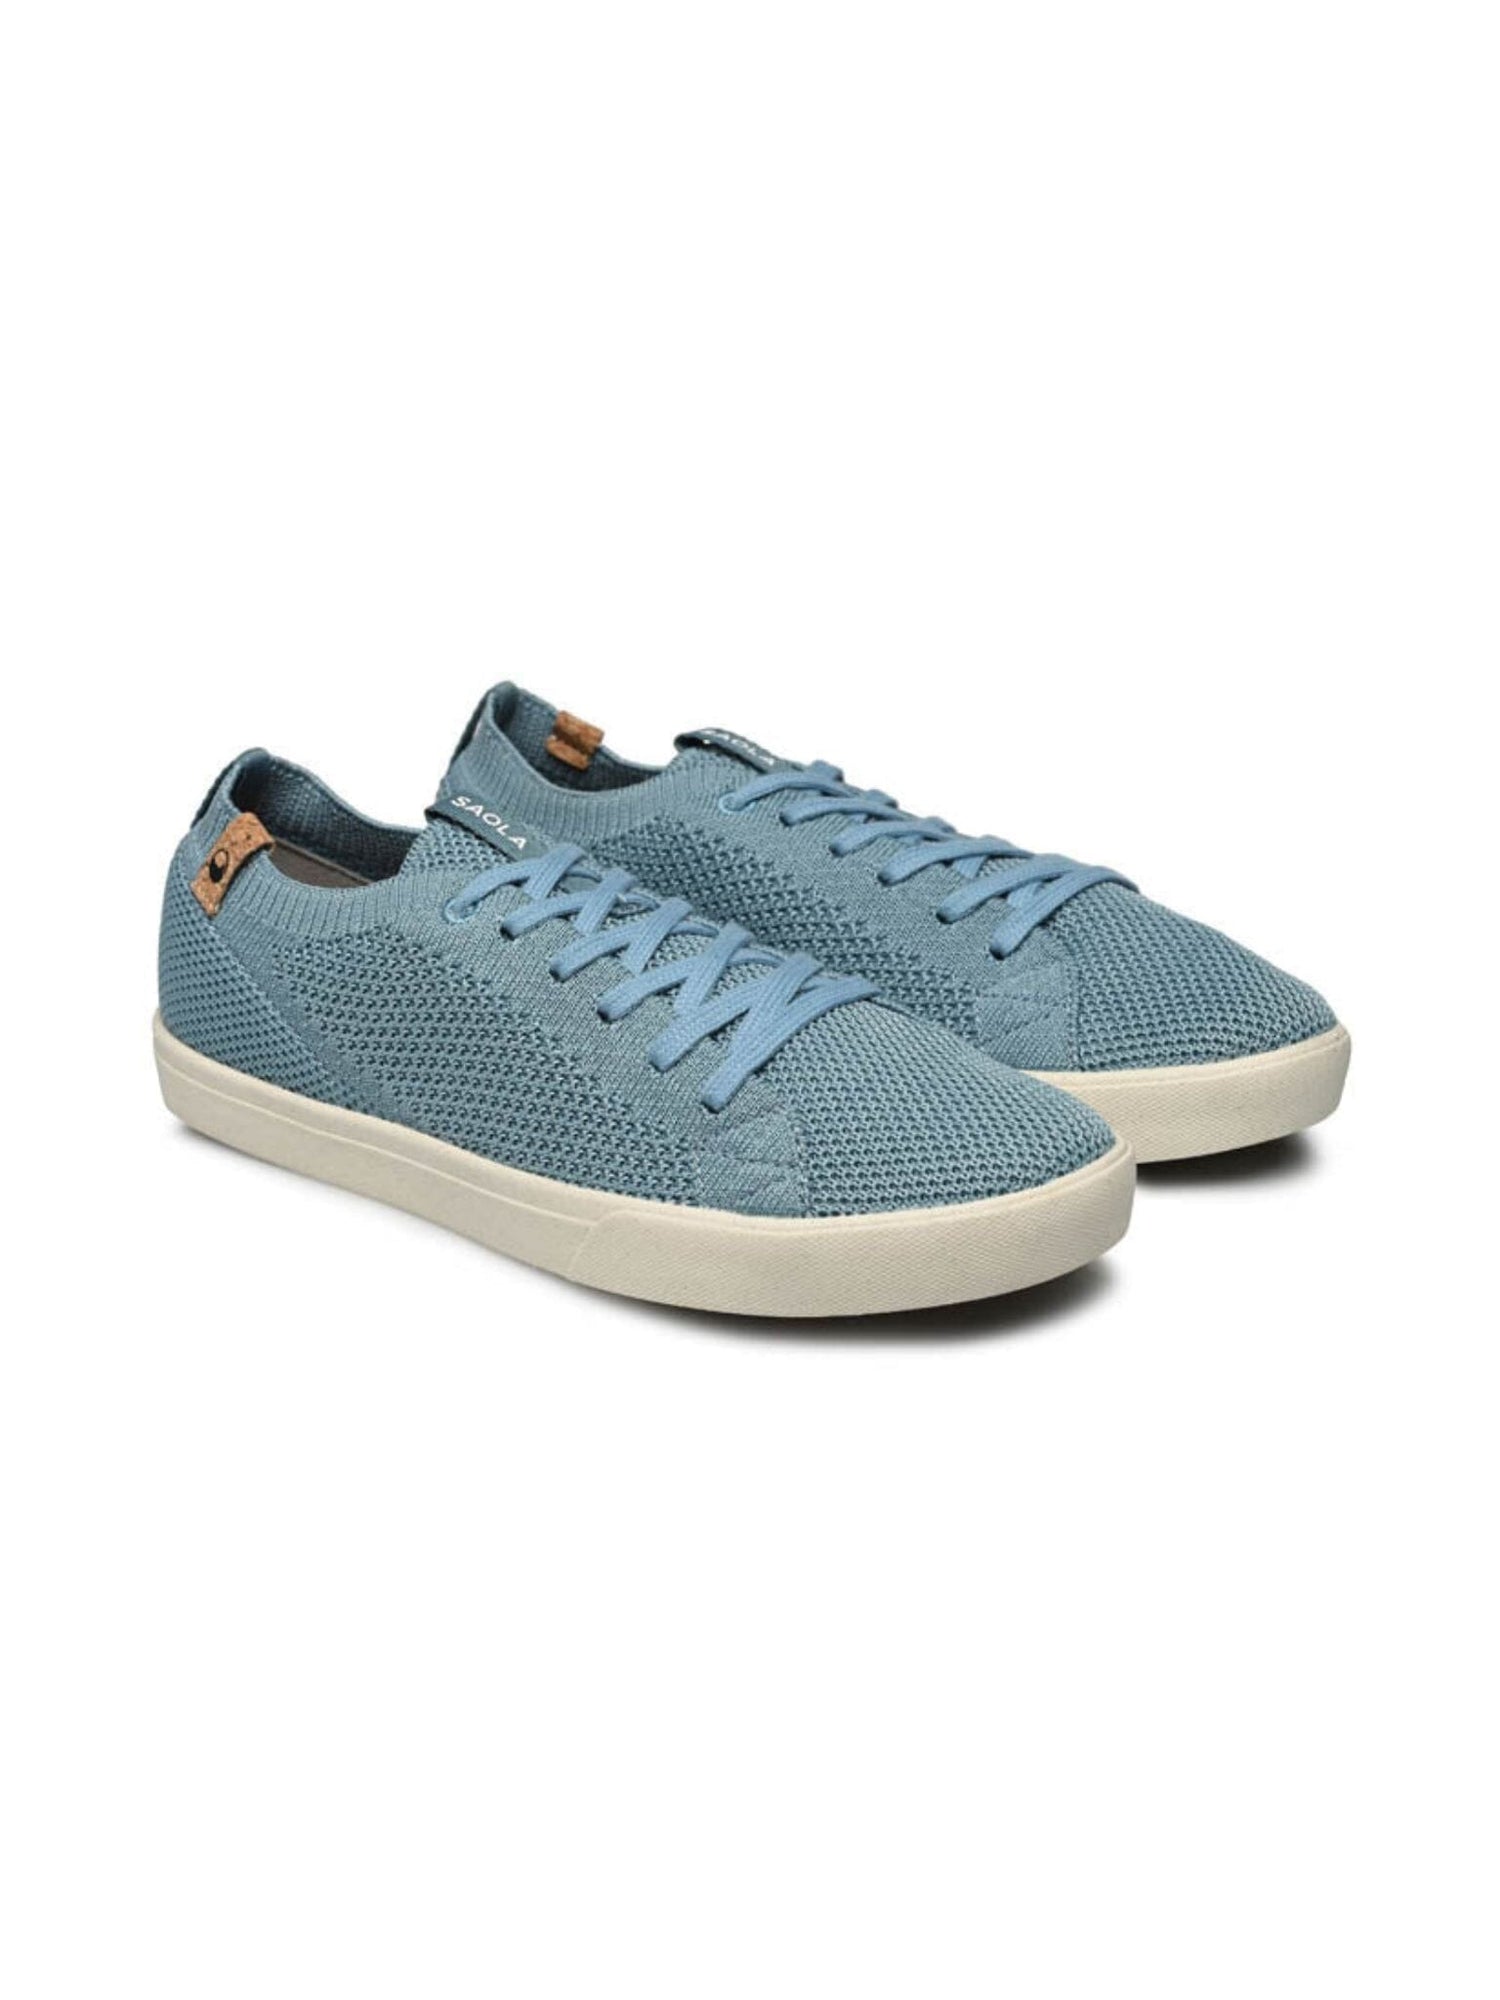 Saola W's Cannon Knit - Recycled PET Smoke Blue Shoes